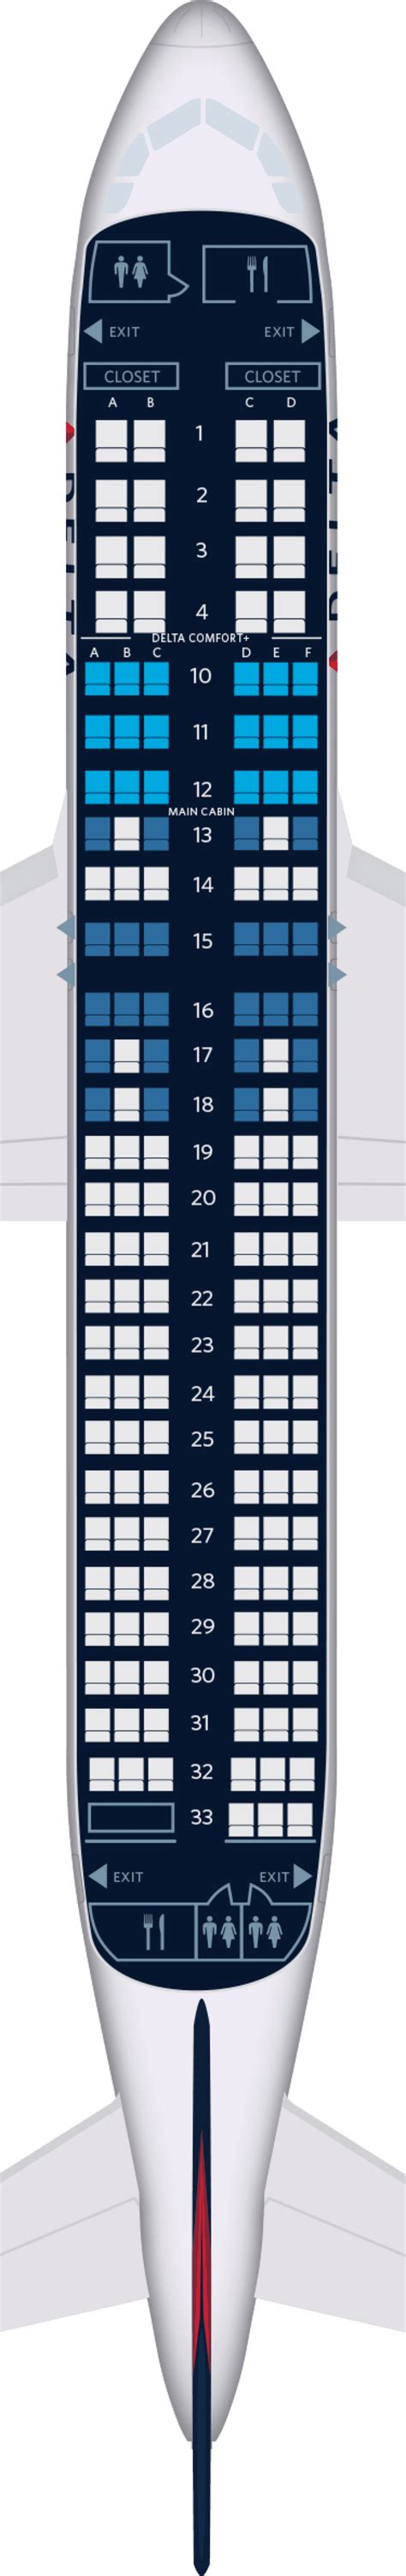 Airbus A320 Seating Chart Delta